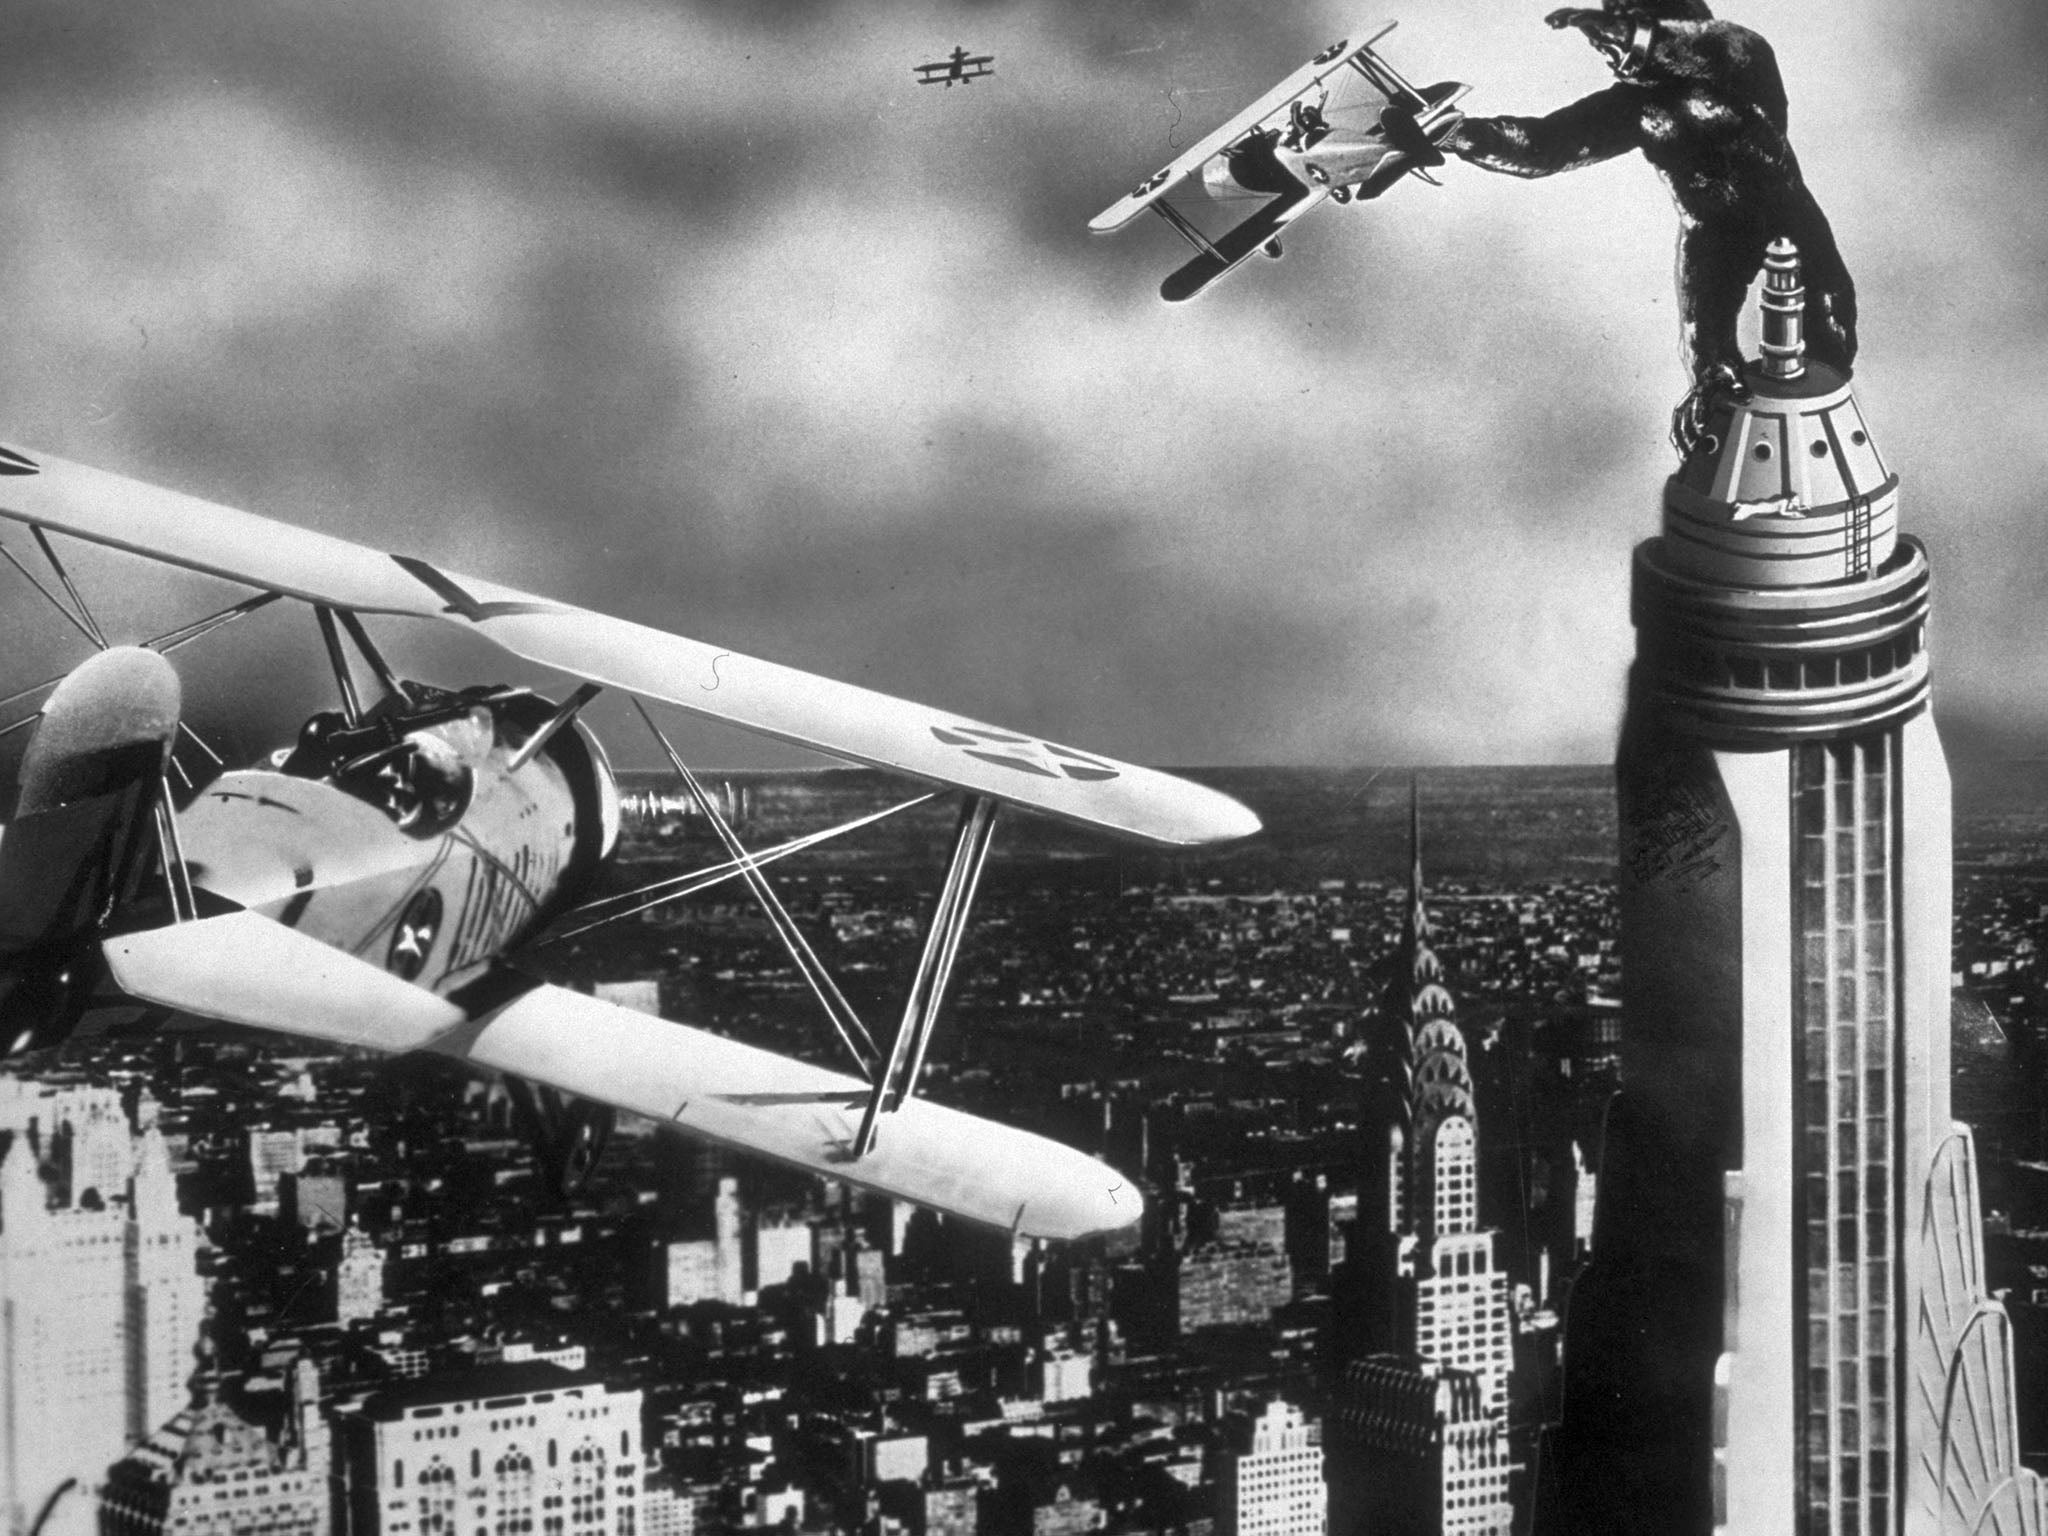 A scene from the film ‘King Kong’, released in 1933